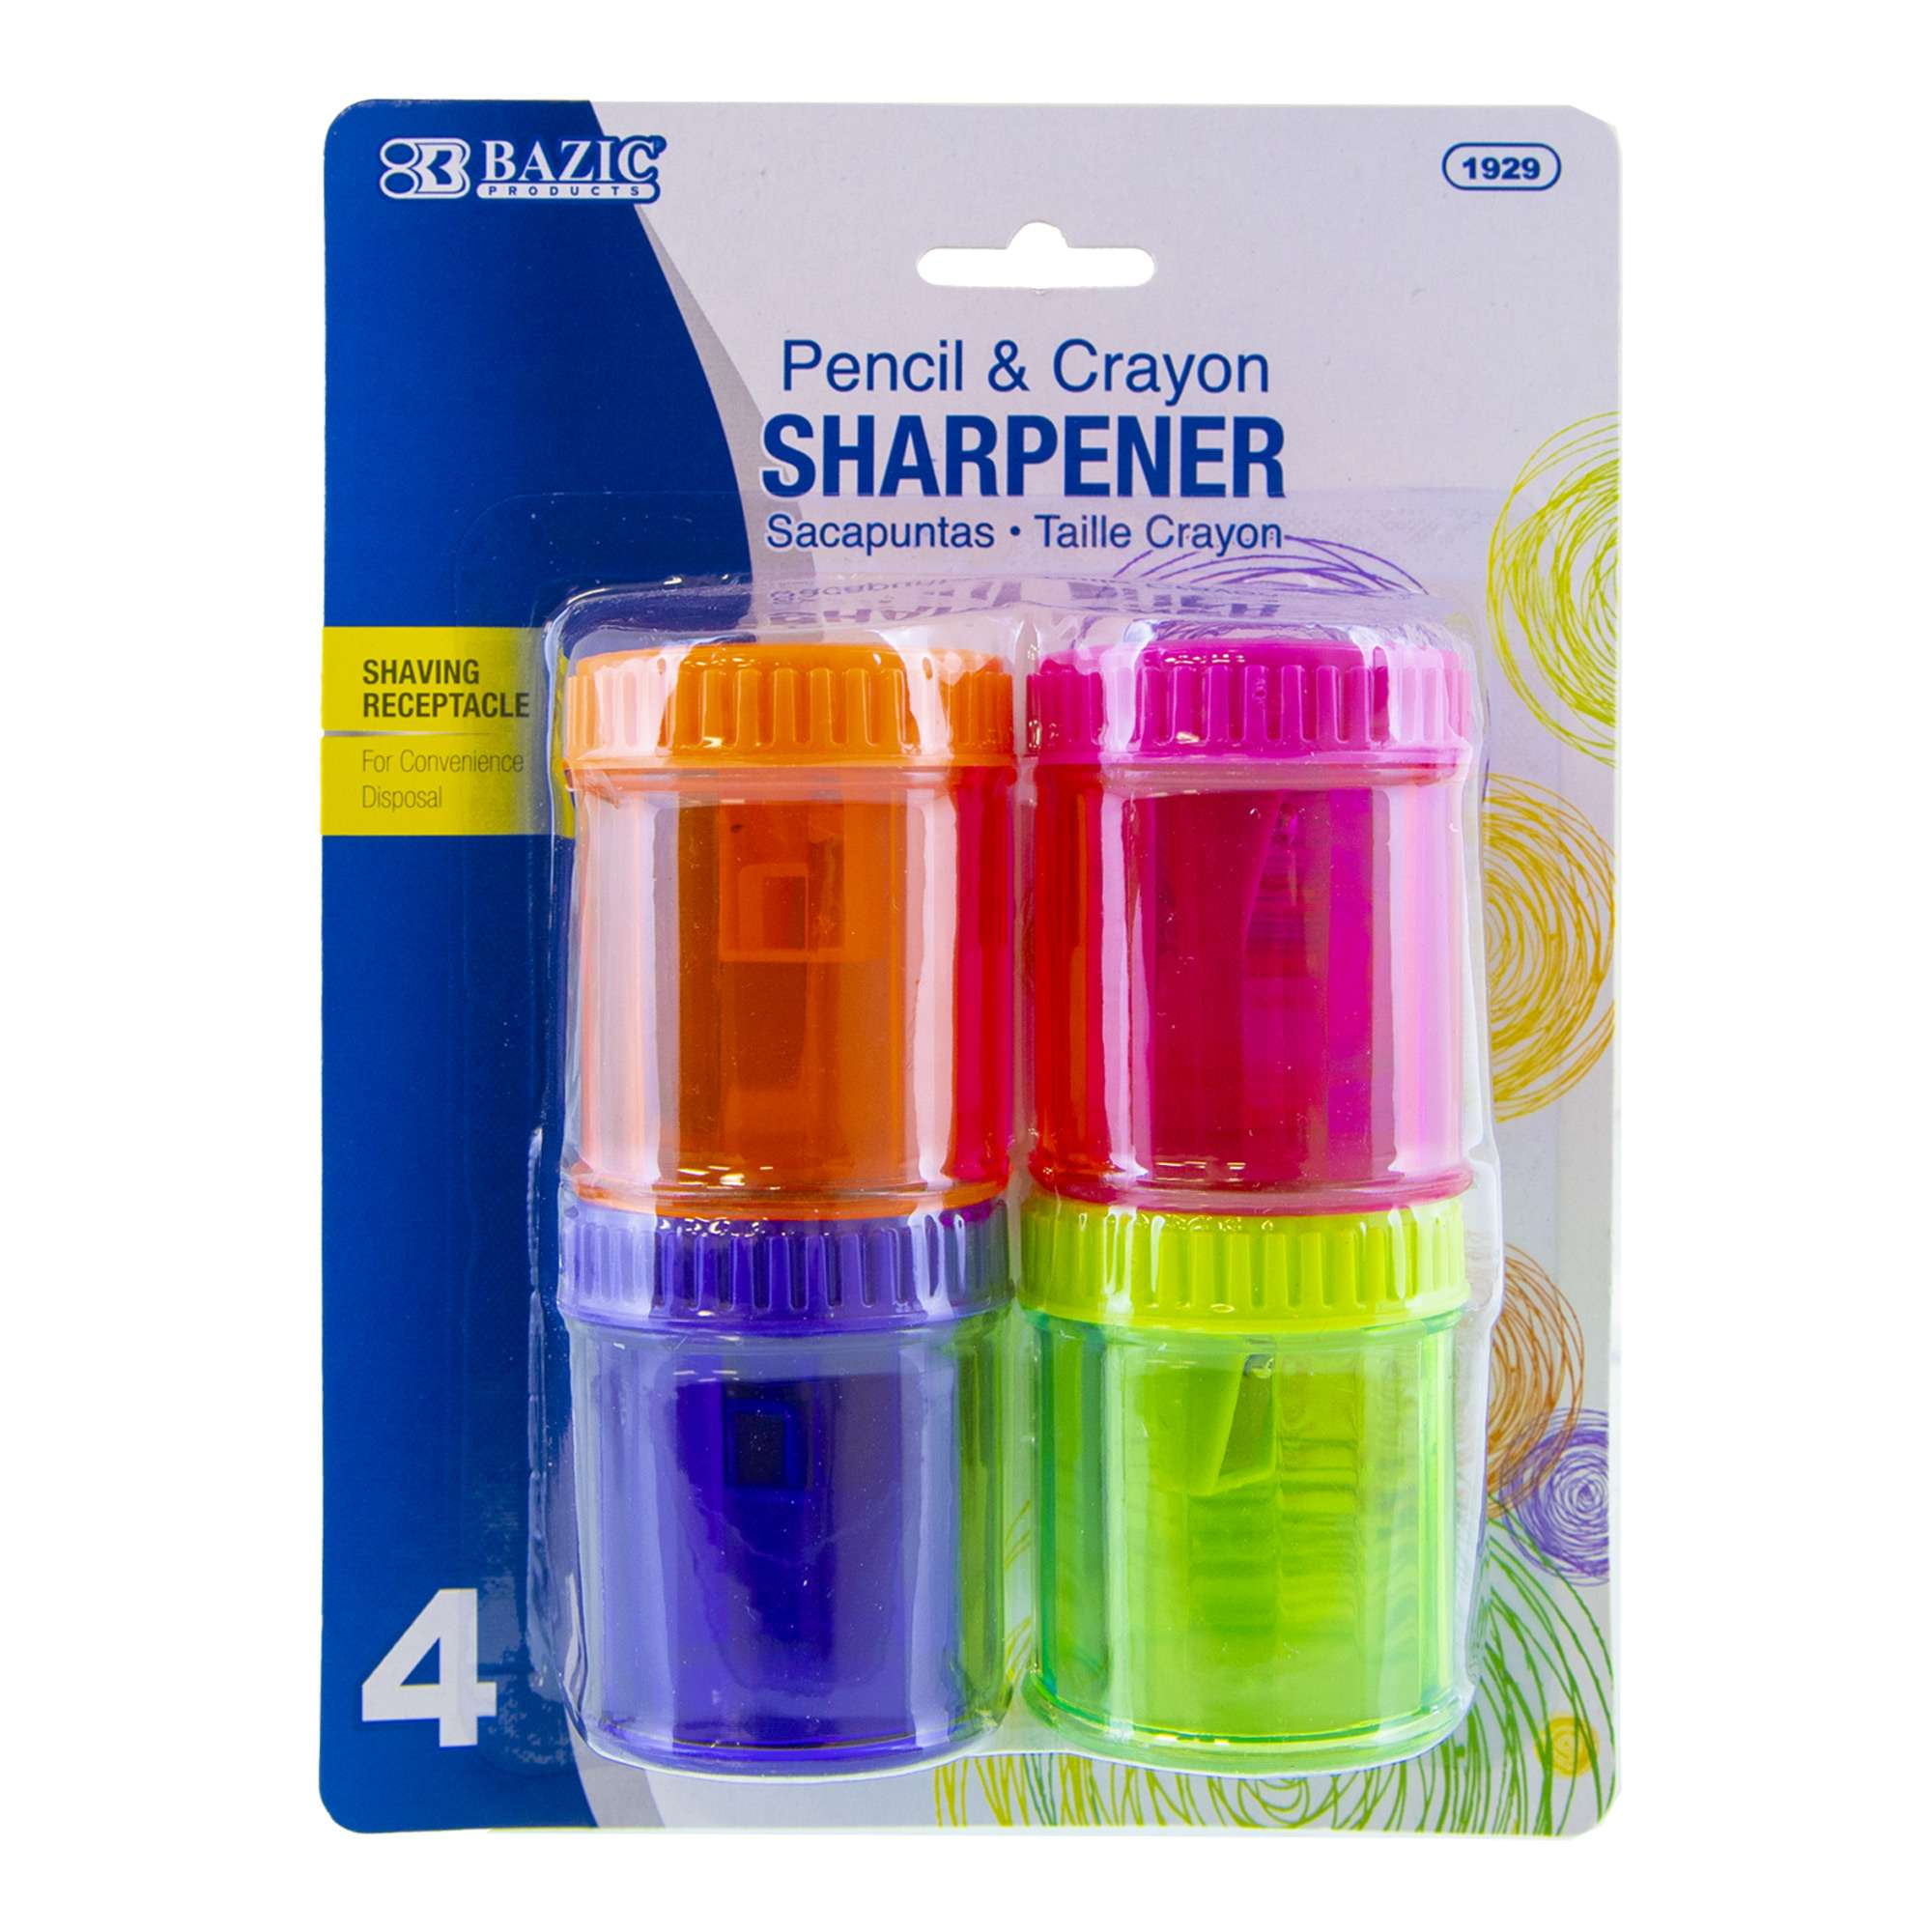 Compact Size for Pencil Case and Sork-Station 1 Pack Multicolor Pencil Sharpener 